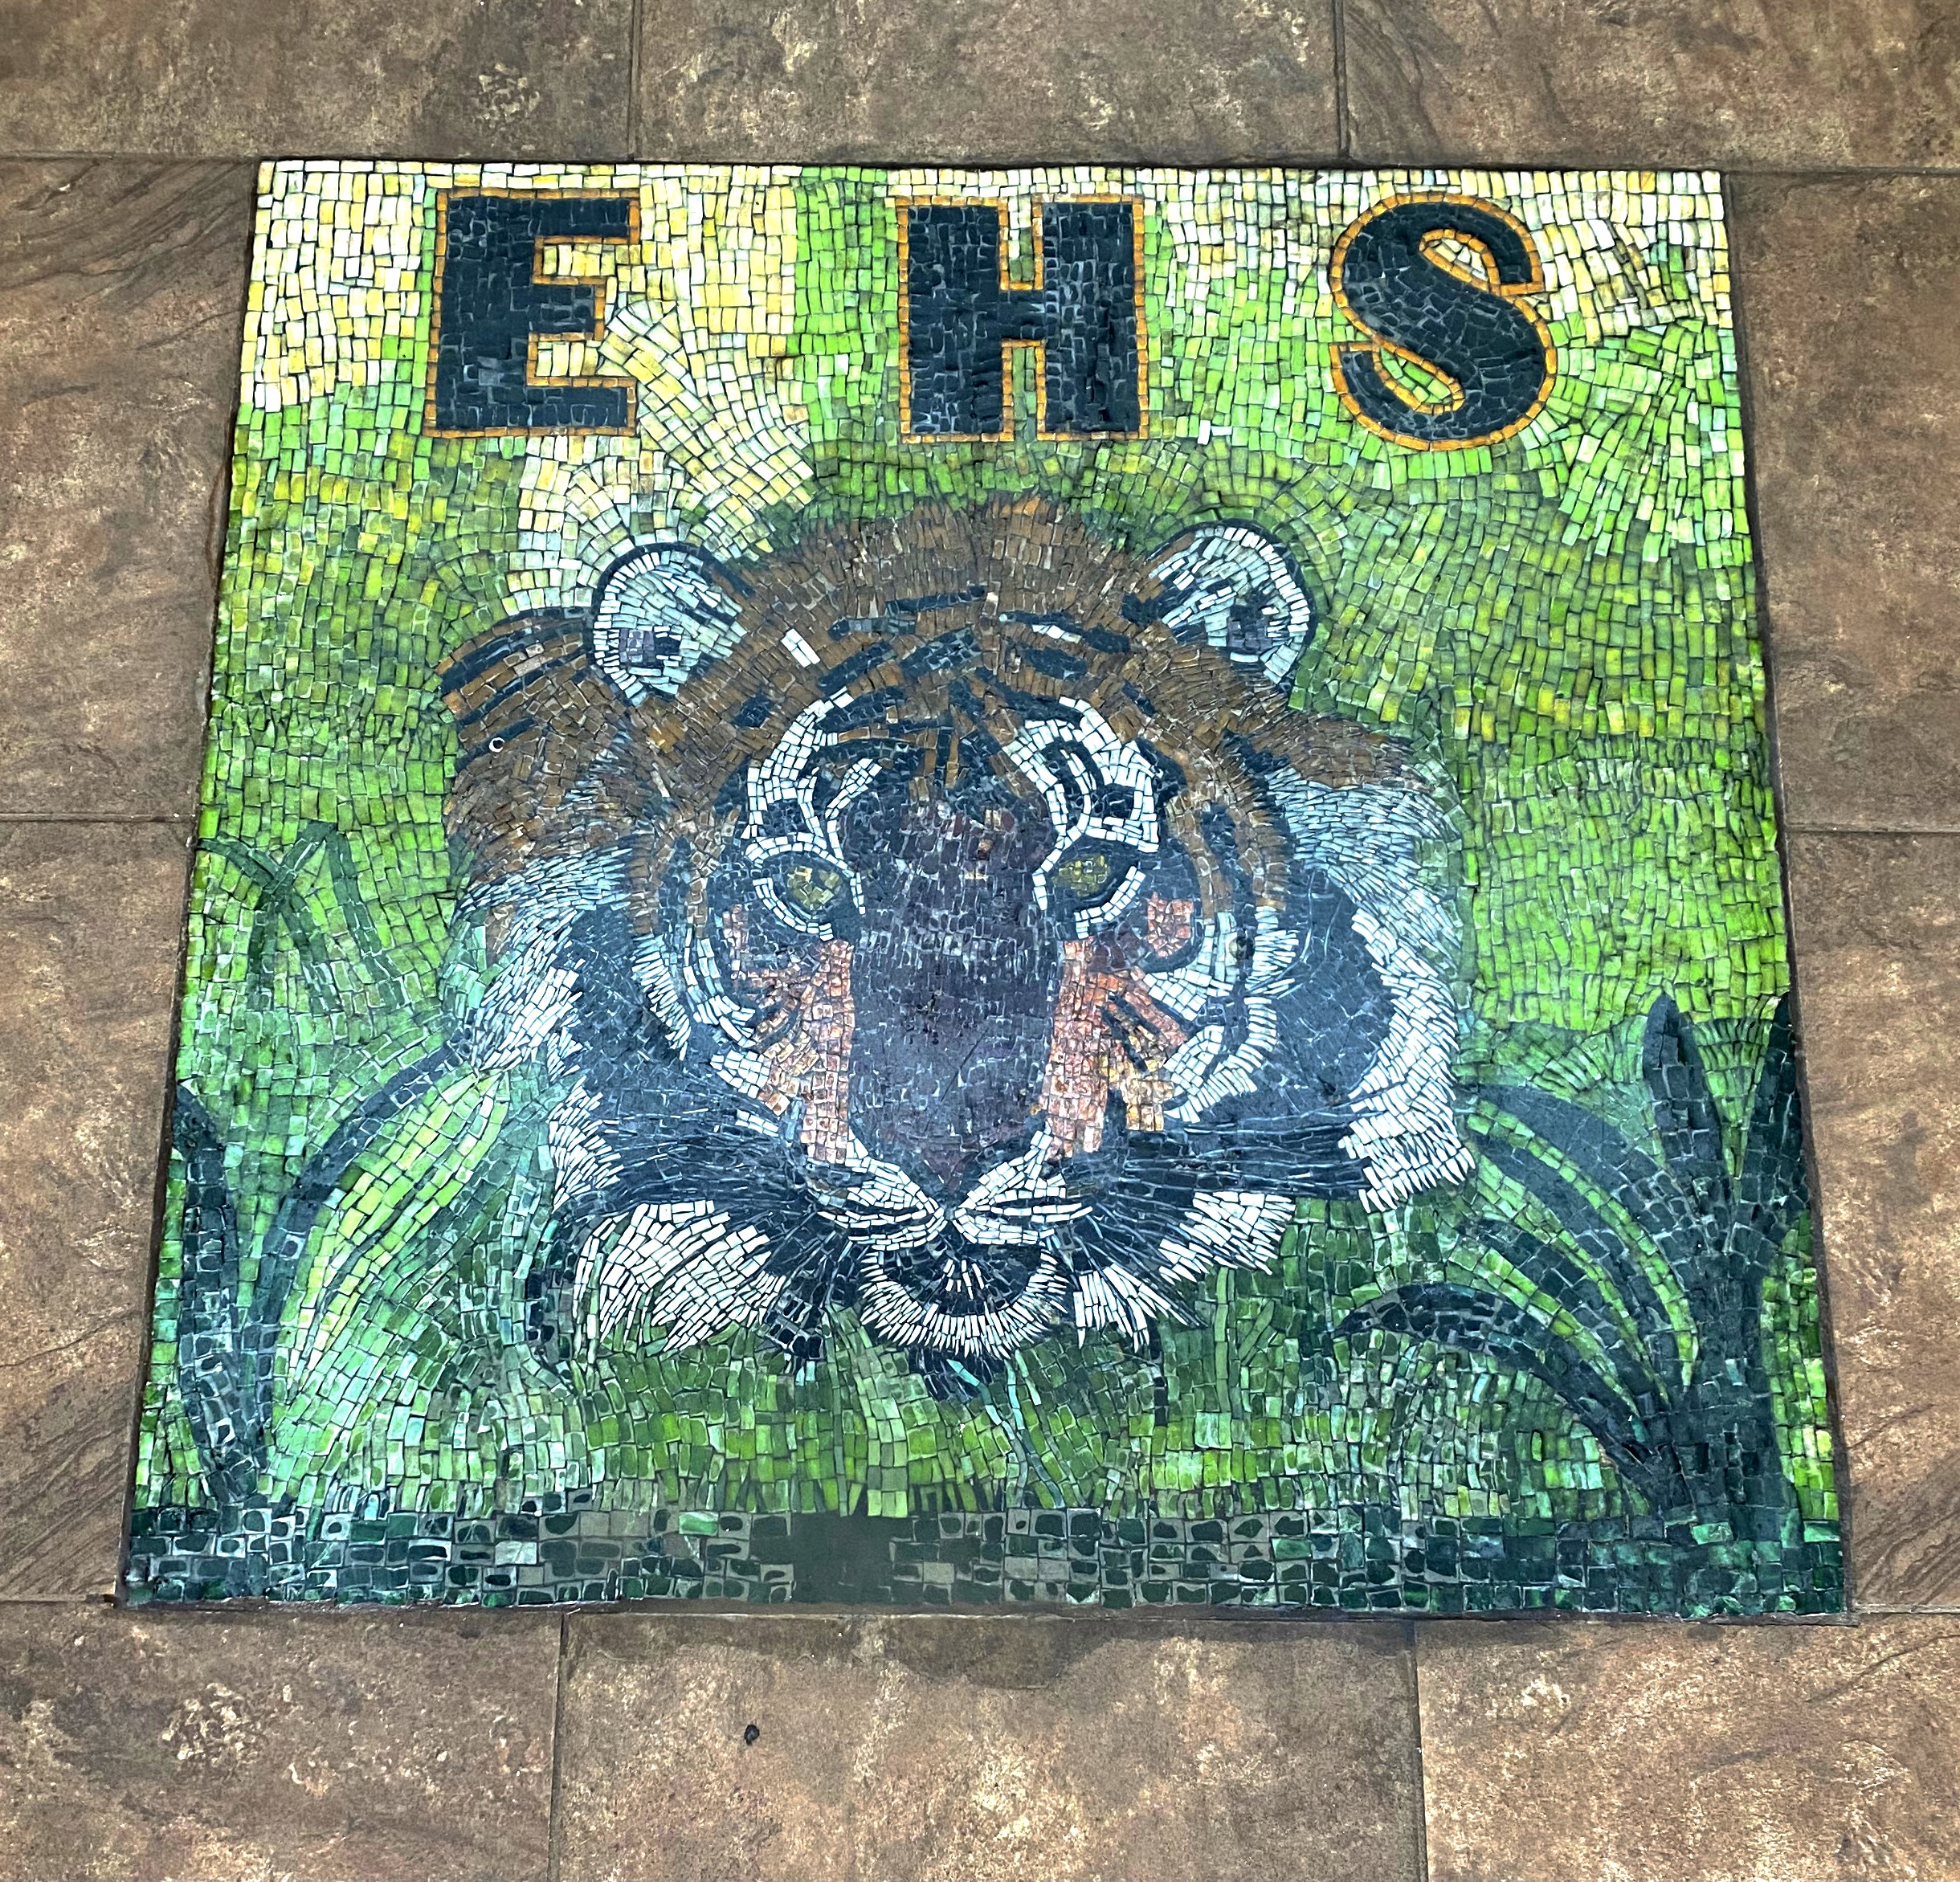 Artwork of a tiger with EHS written at the top